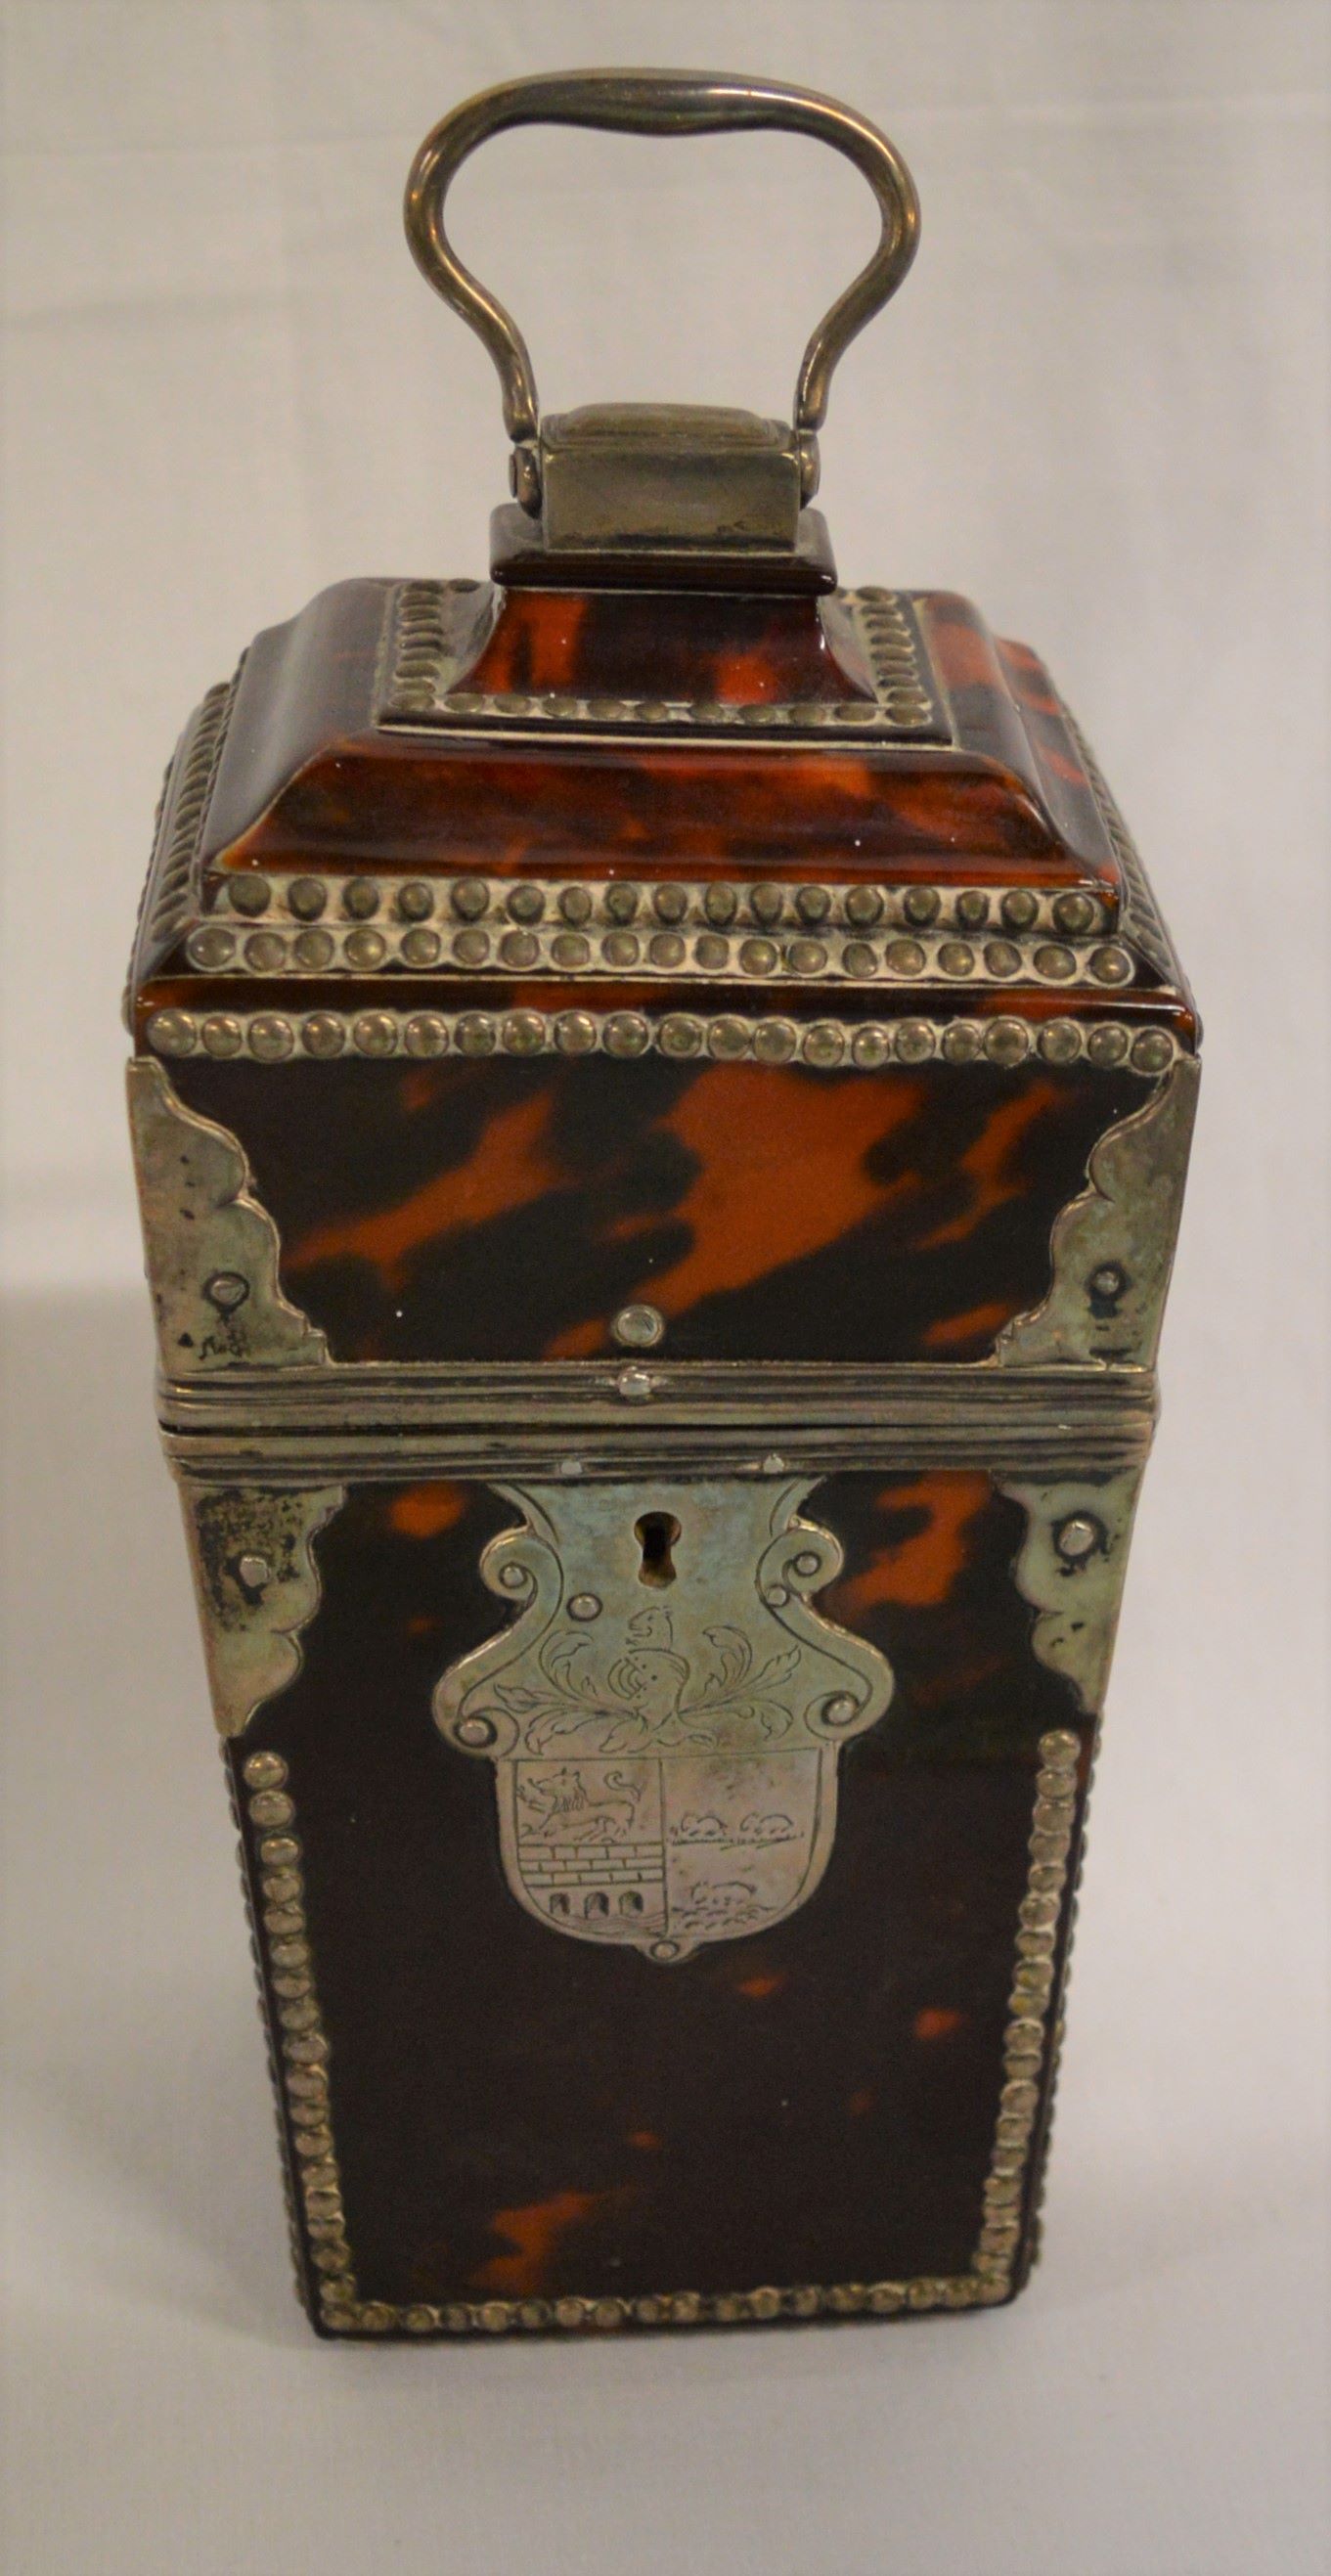 Continental tortoiseshell tea caddy (possibly originally a necessaire) with white metal